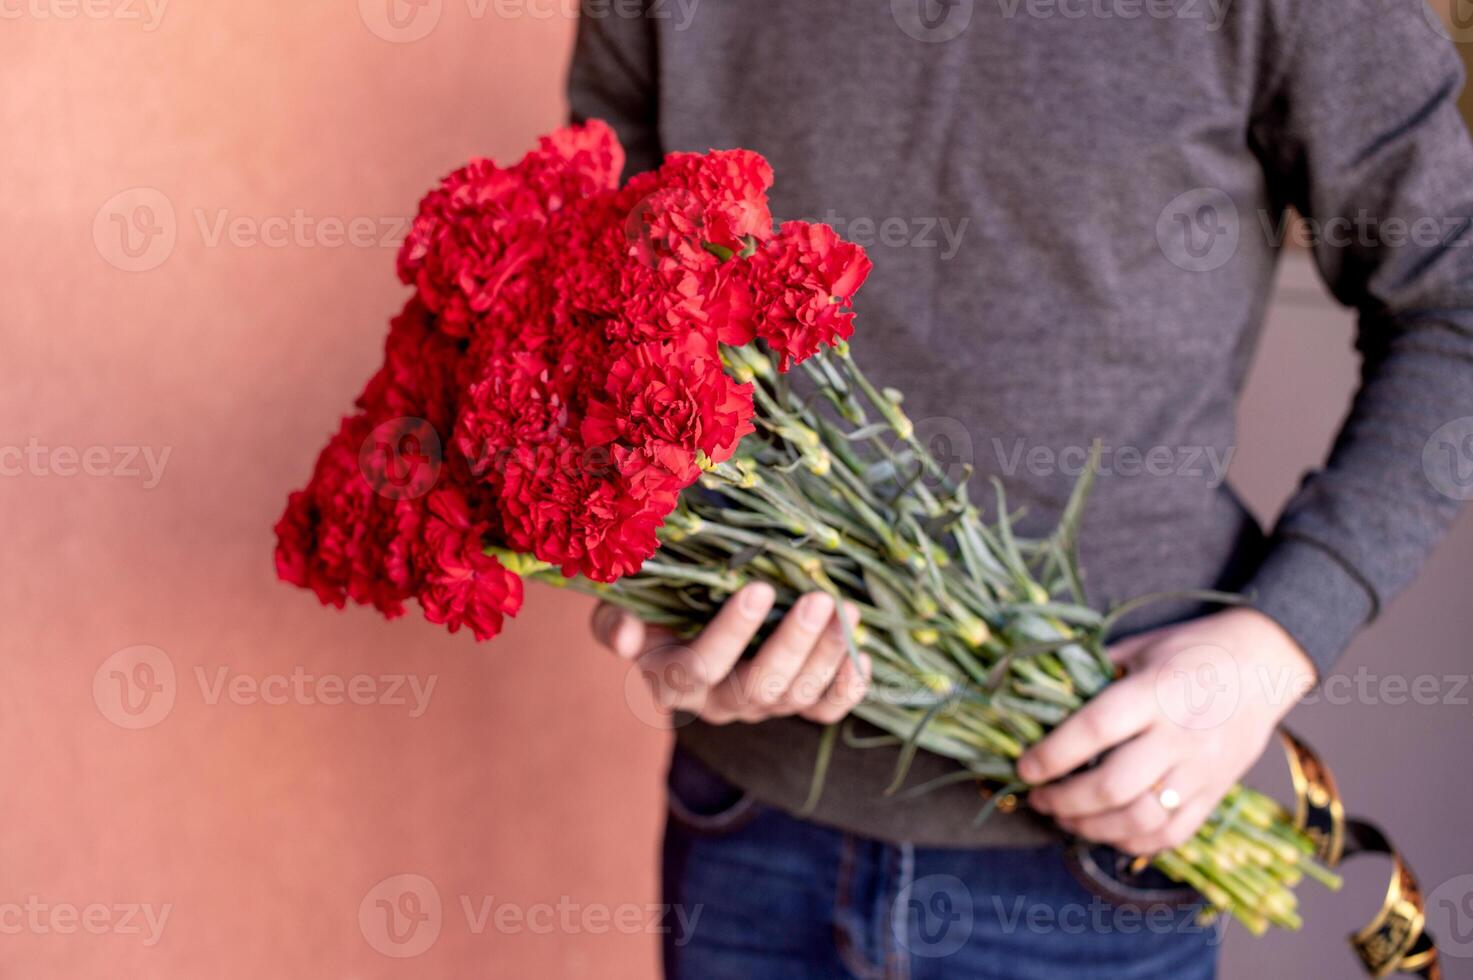 Funeral bouquet of red carnations with in the hands of a man photo